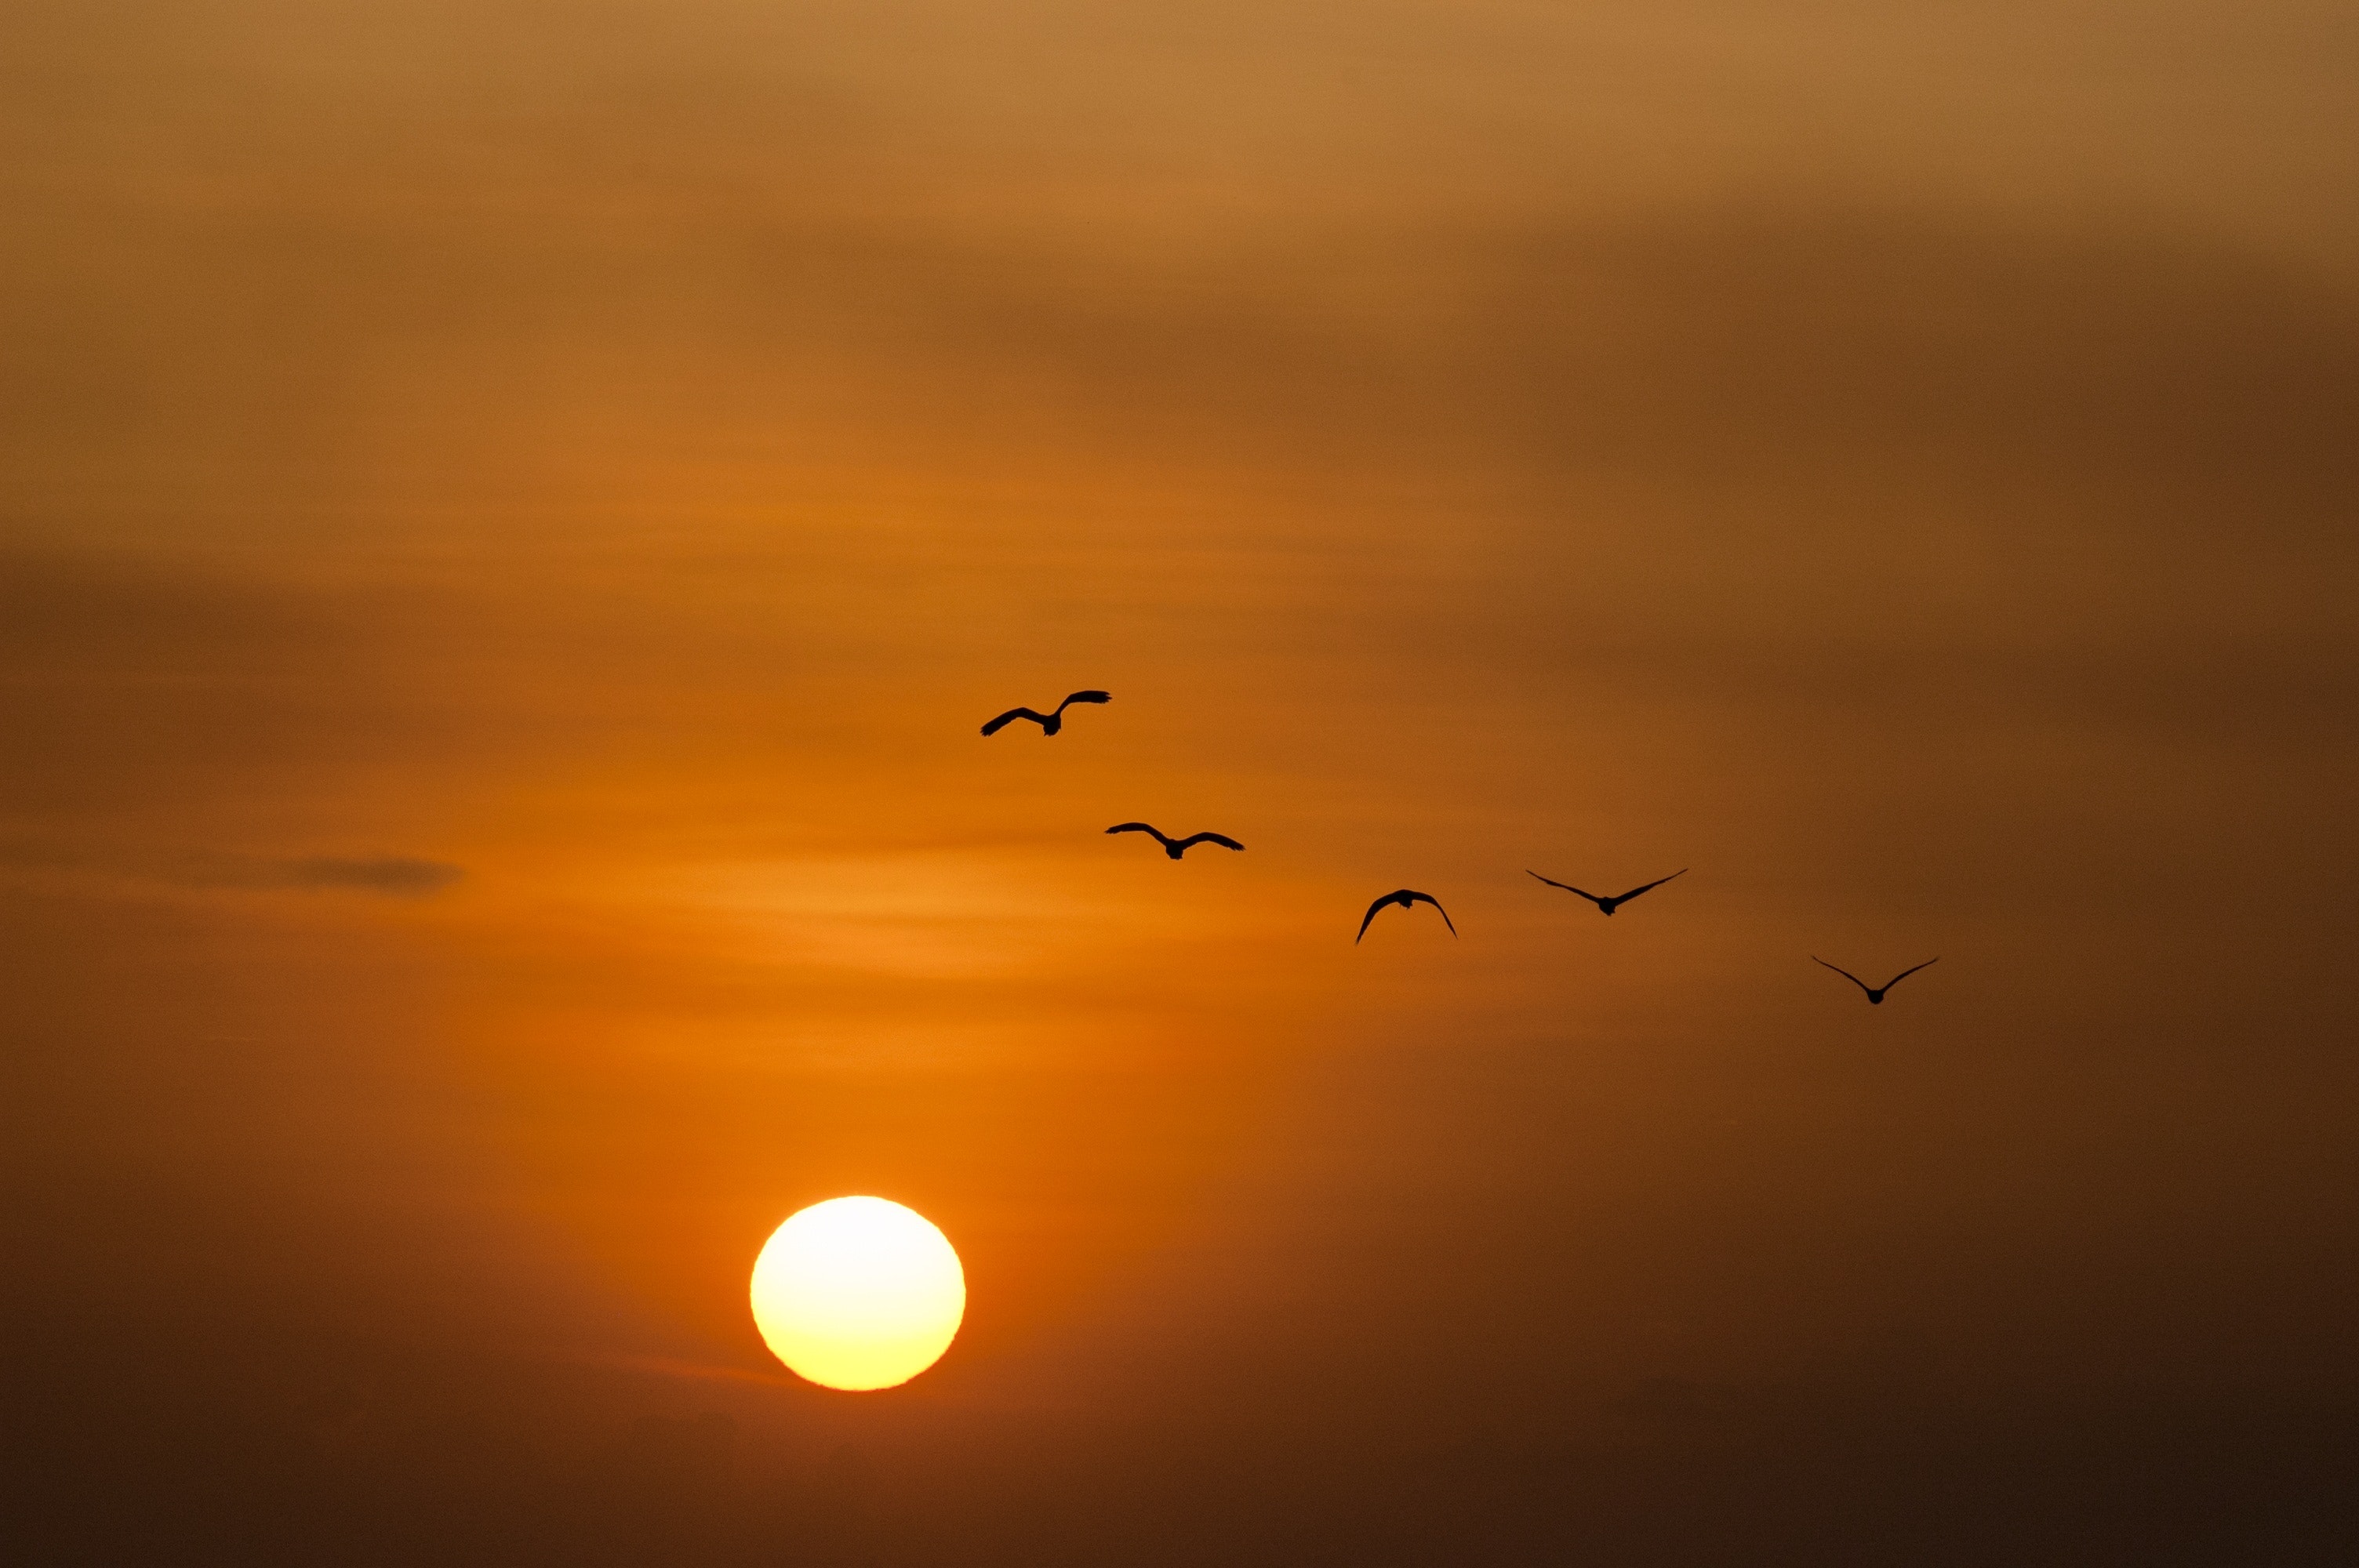 Birds Silhouette during Sunset · Free Stock Photo